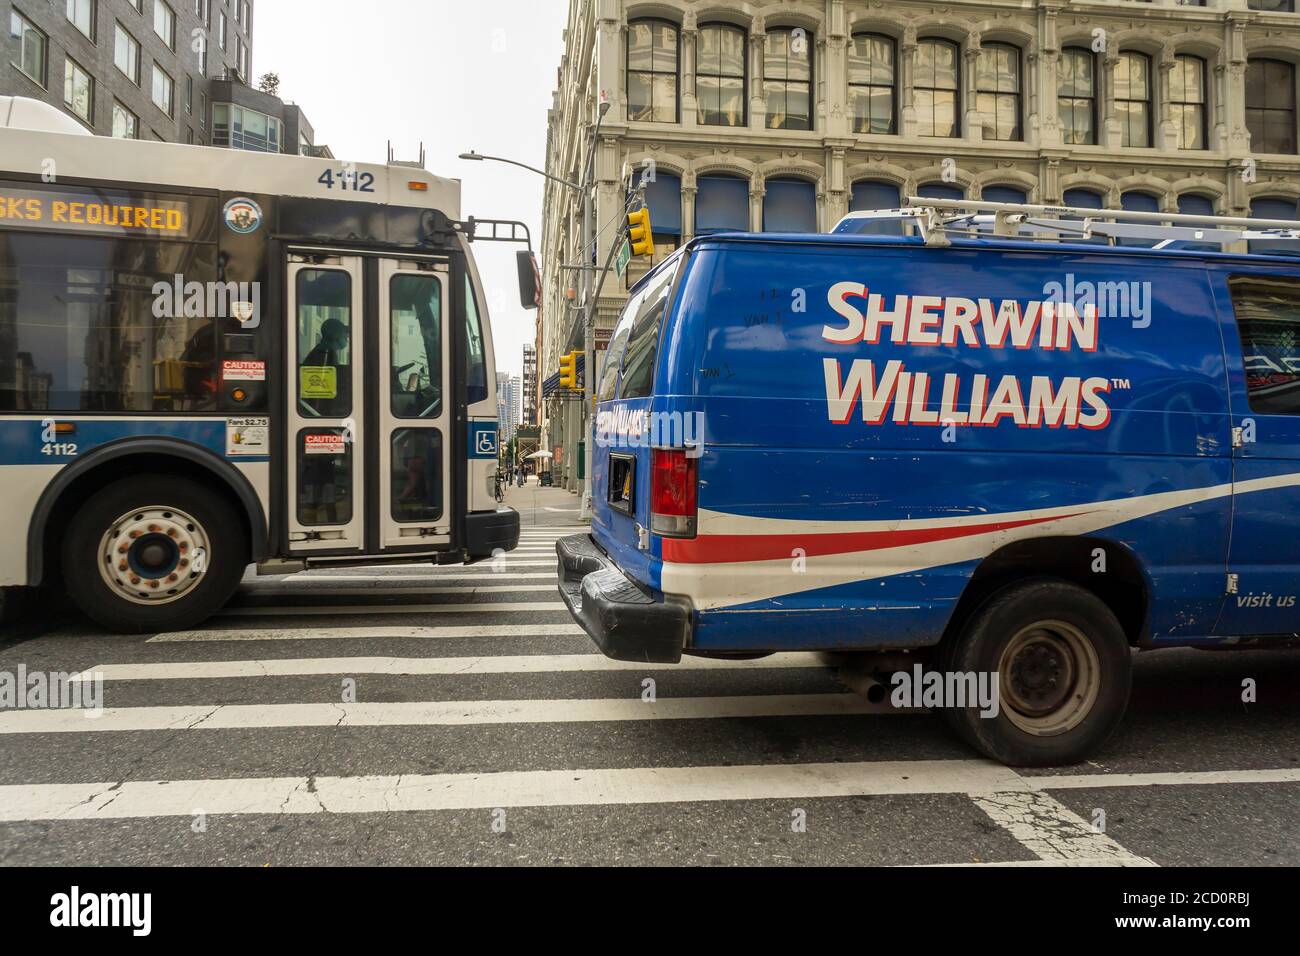 A Sherwin-Williams truck parked in Chelsea in New York on Tuesday, August 11, 2020. The paint company Sherwin Williams Co. recently reported second-quarter results that beat analysts’ expectations despite the effects of the covid-19 pandemic. (© Richard B. Levine) Stock Photo